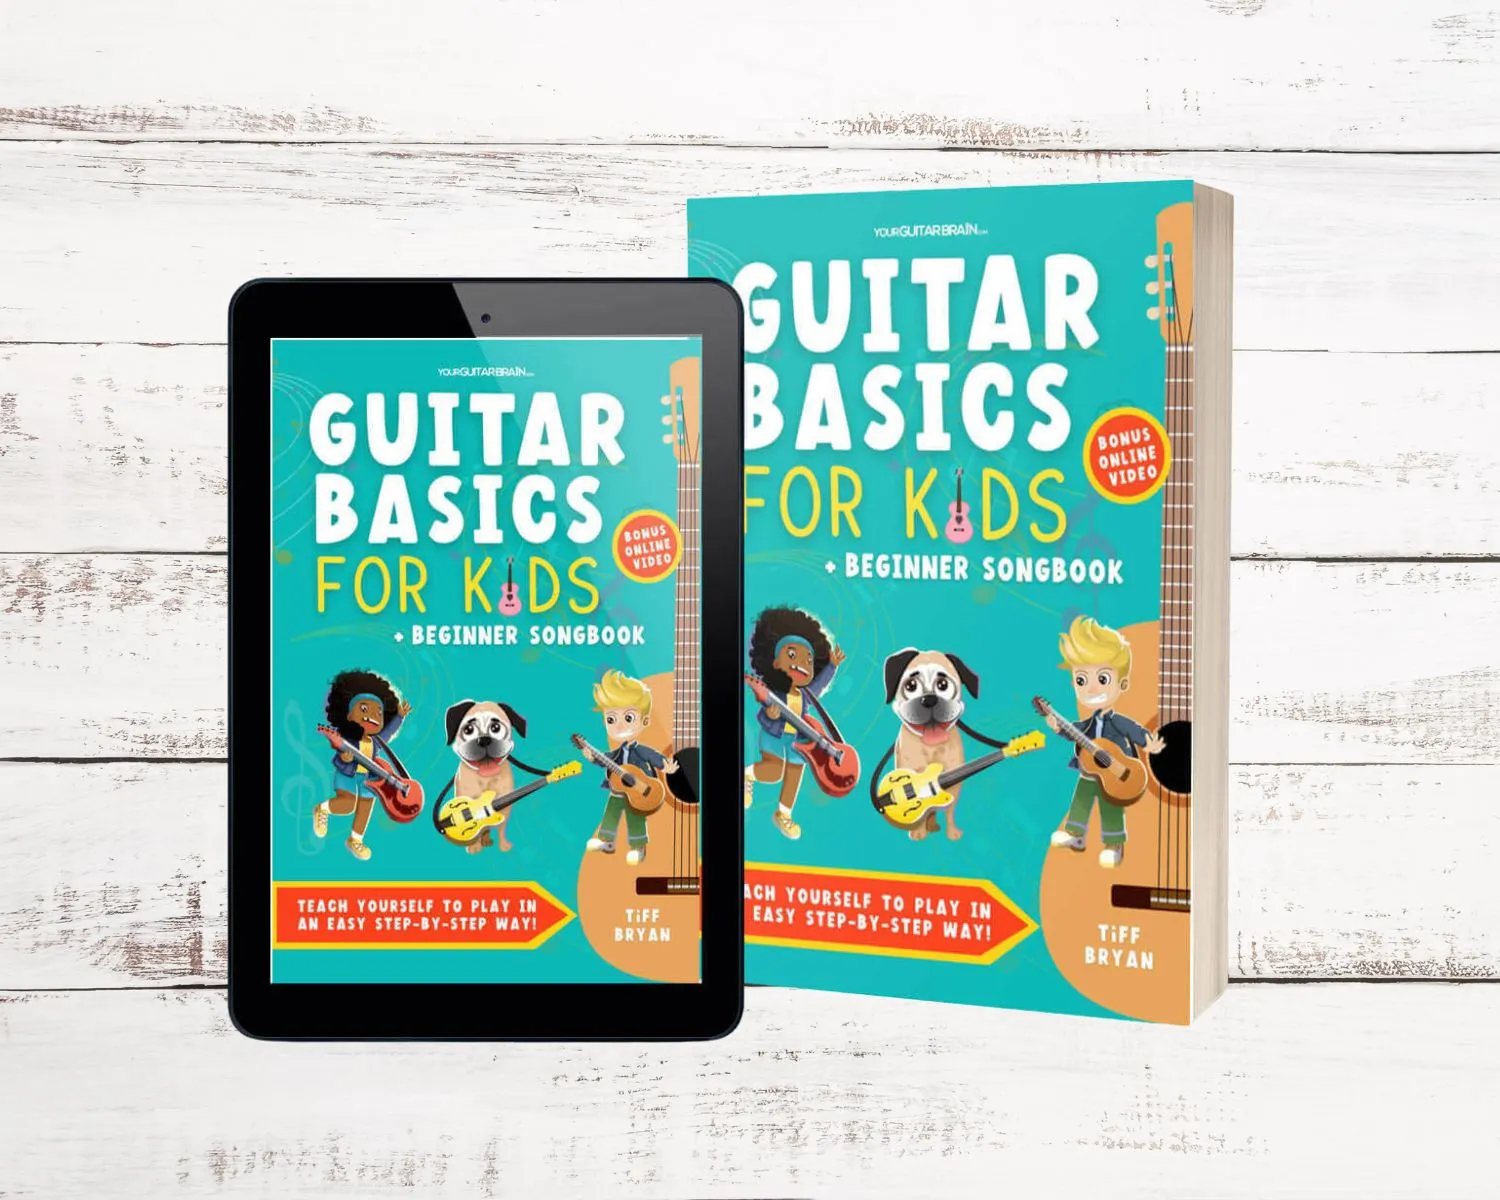 Childrens educational books called Guitar Basics for Kids which teaches them how to learn guitar and is kids creative activities